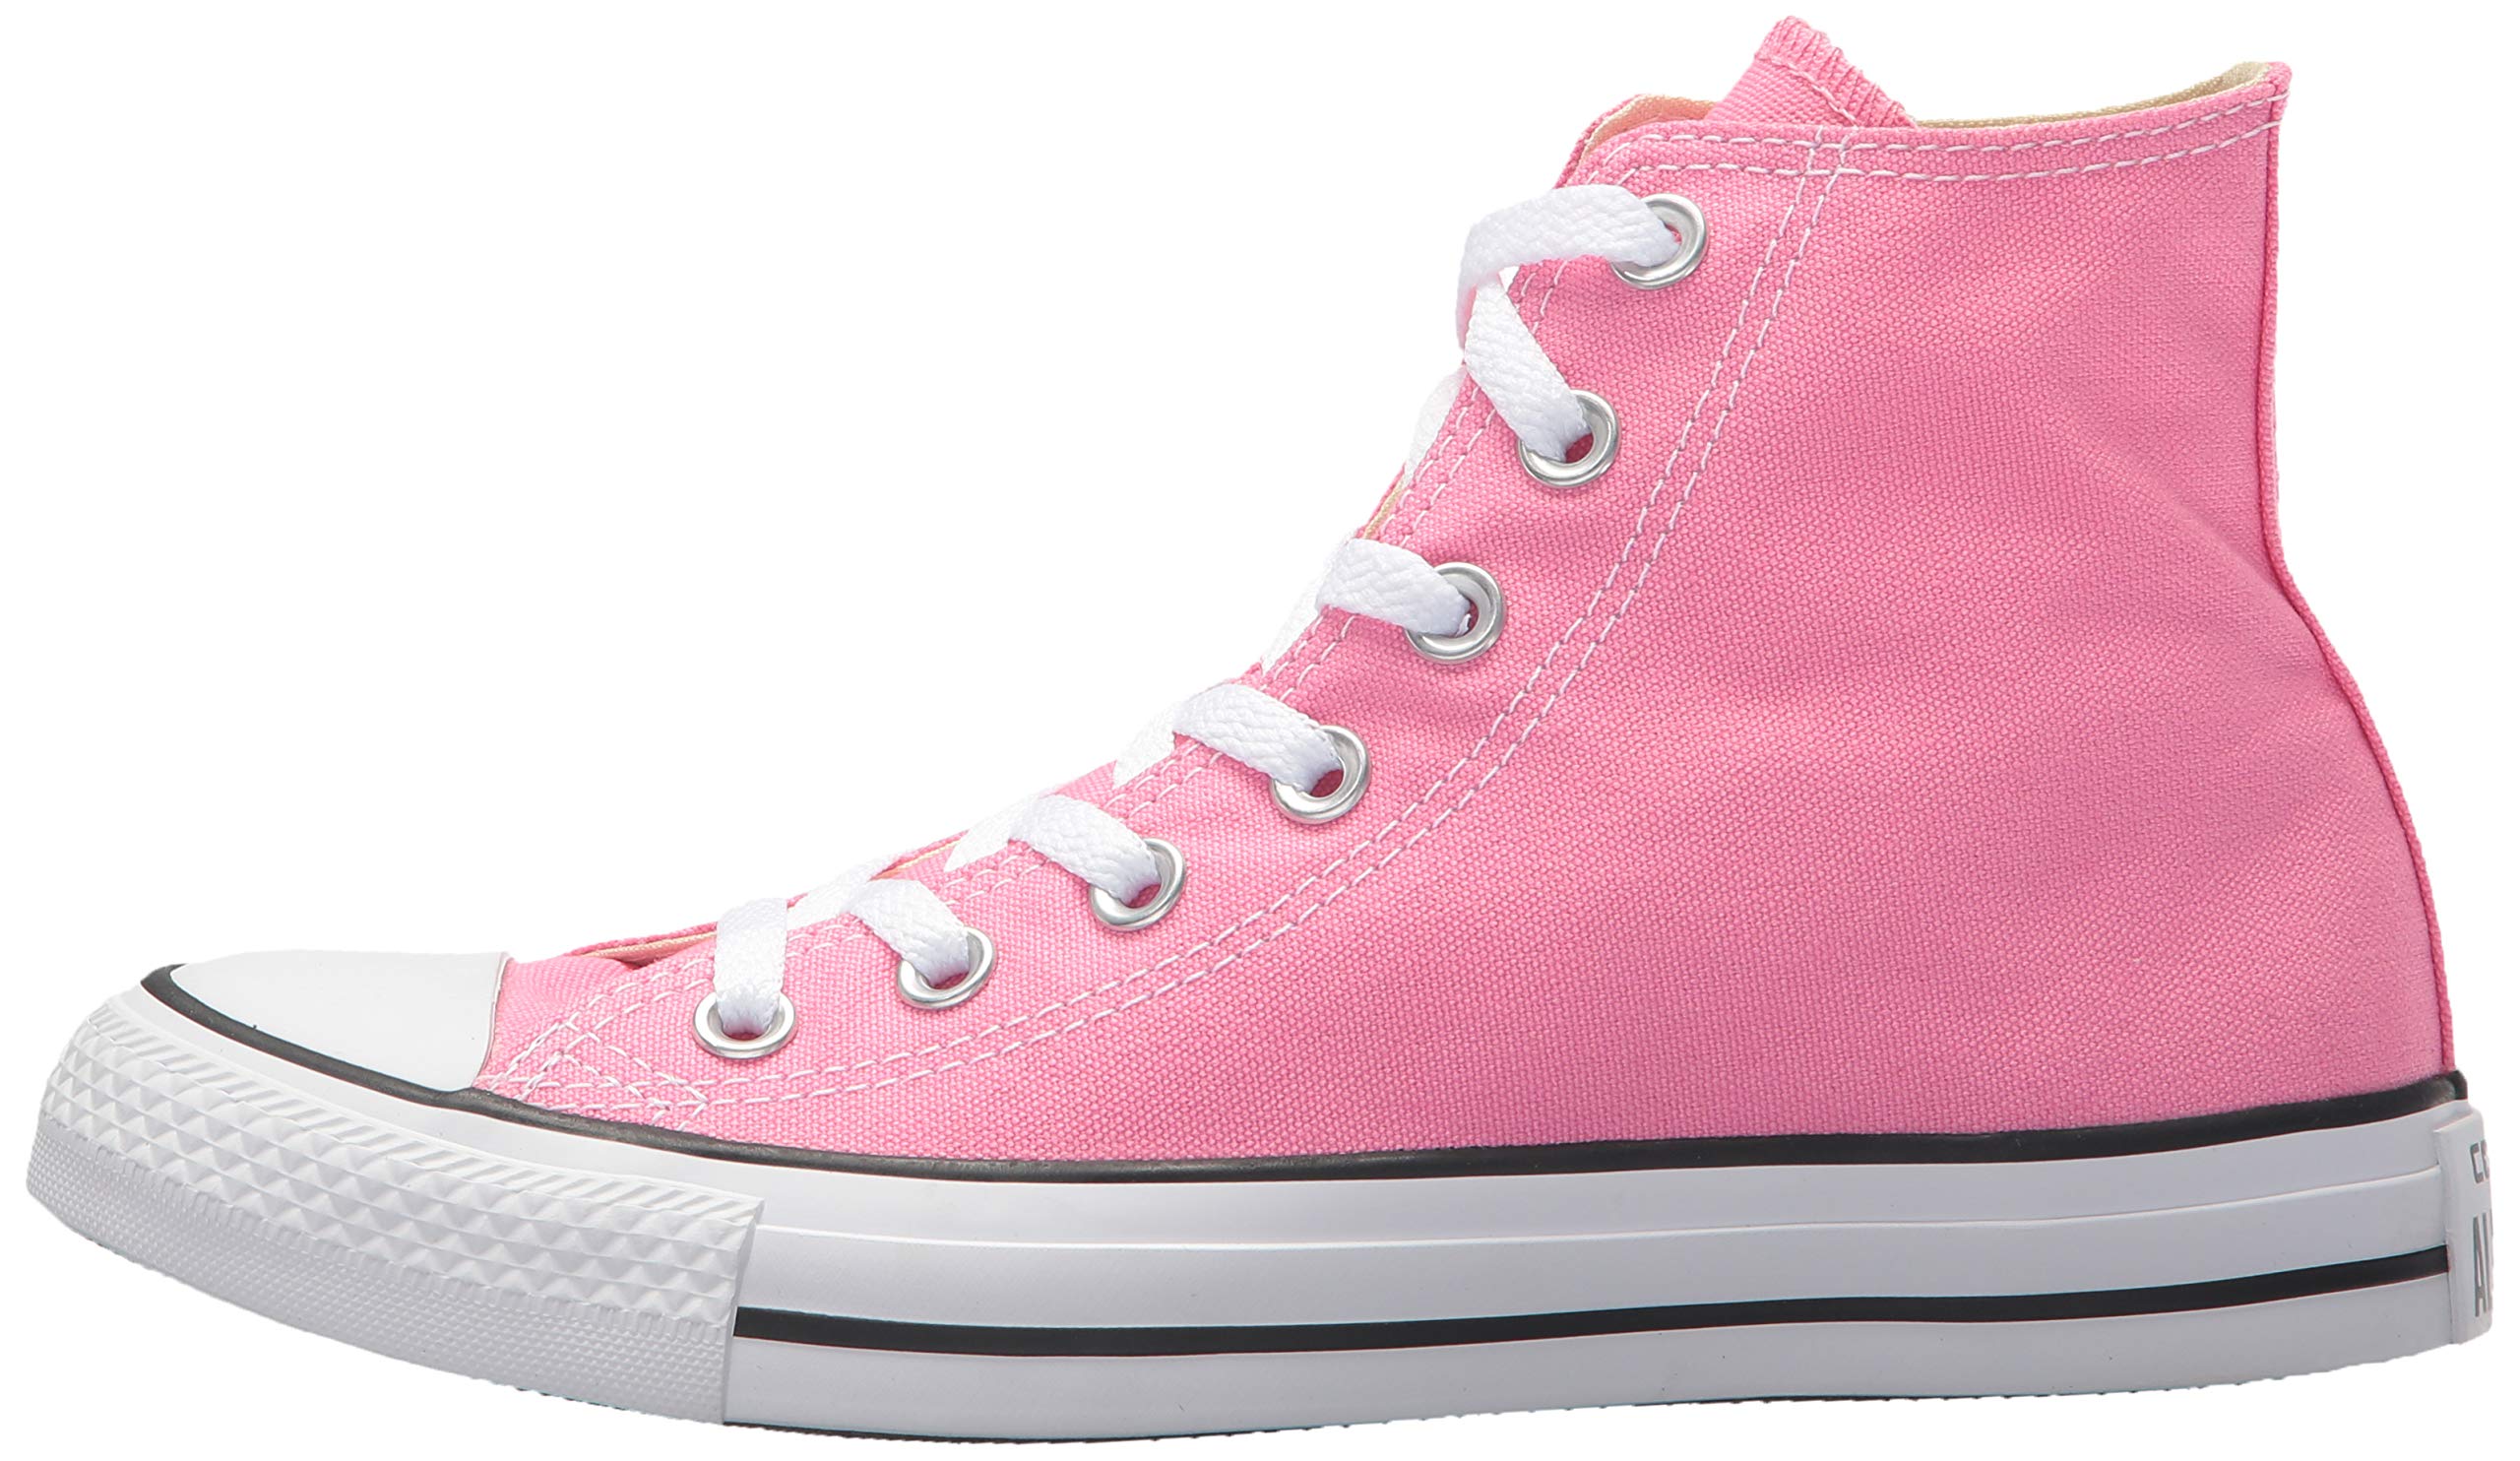 Converse Chuck Taylor All Star Hi Pink High-Top Fashion Sneaker - 6.5M / 4.5M - image 3 of 10